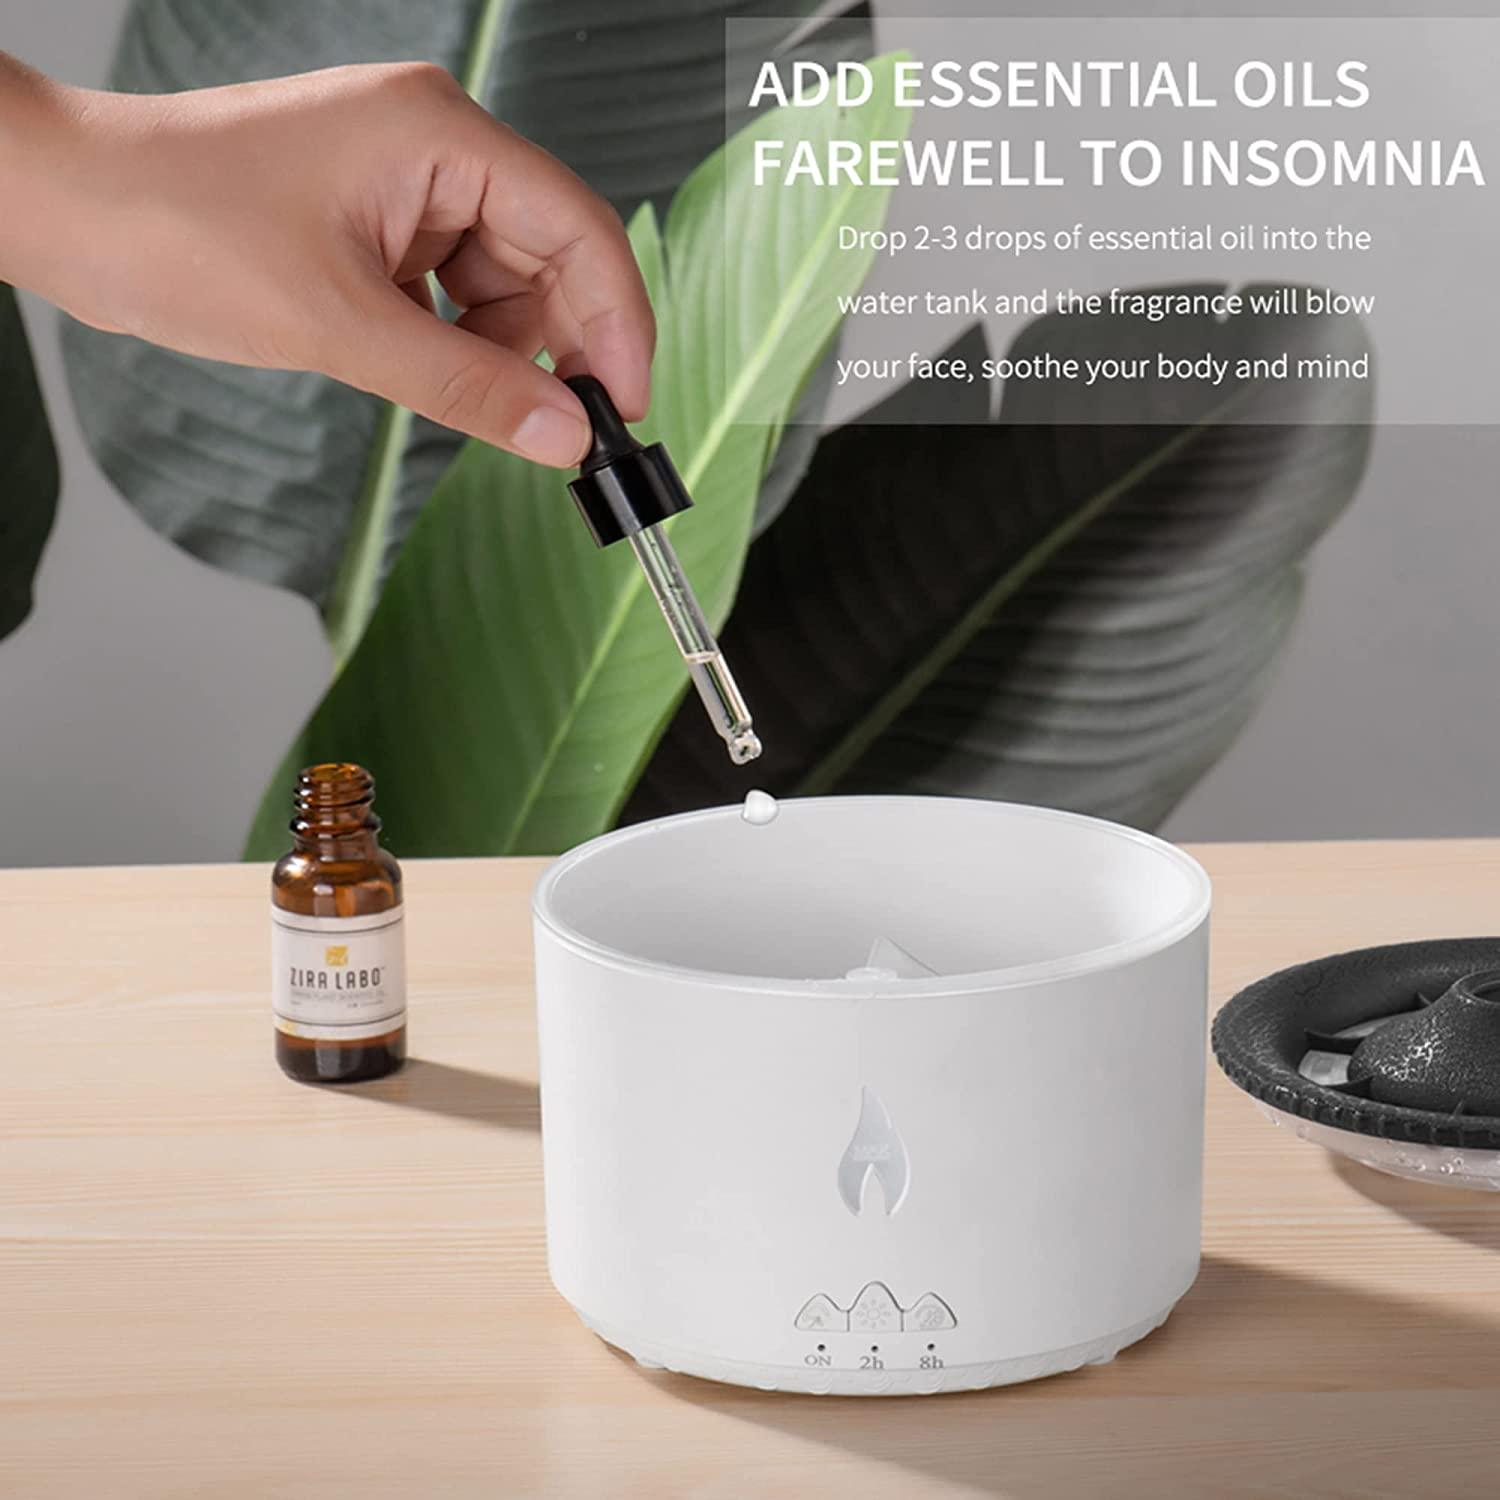 HIVAGI® Flame Air Diffuser Volcano Aroma Diffuser Ultrasonic Oil Diffuser  360mL Auto-Off Protection for Home,Office or Yoga, Gym.